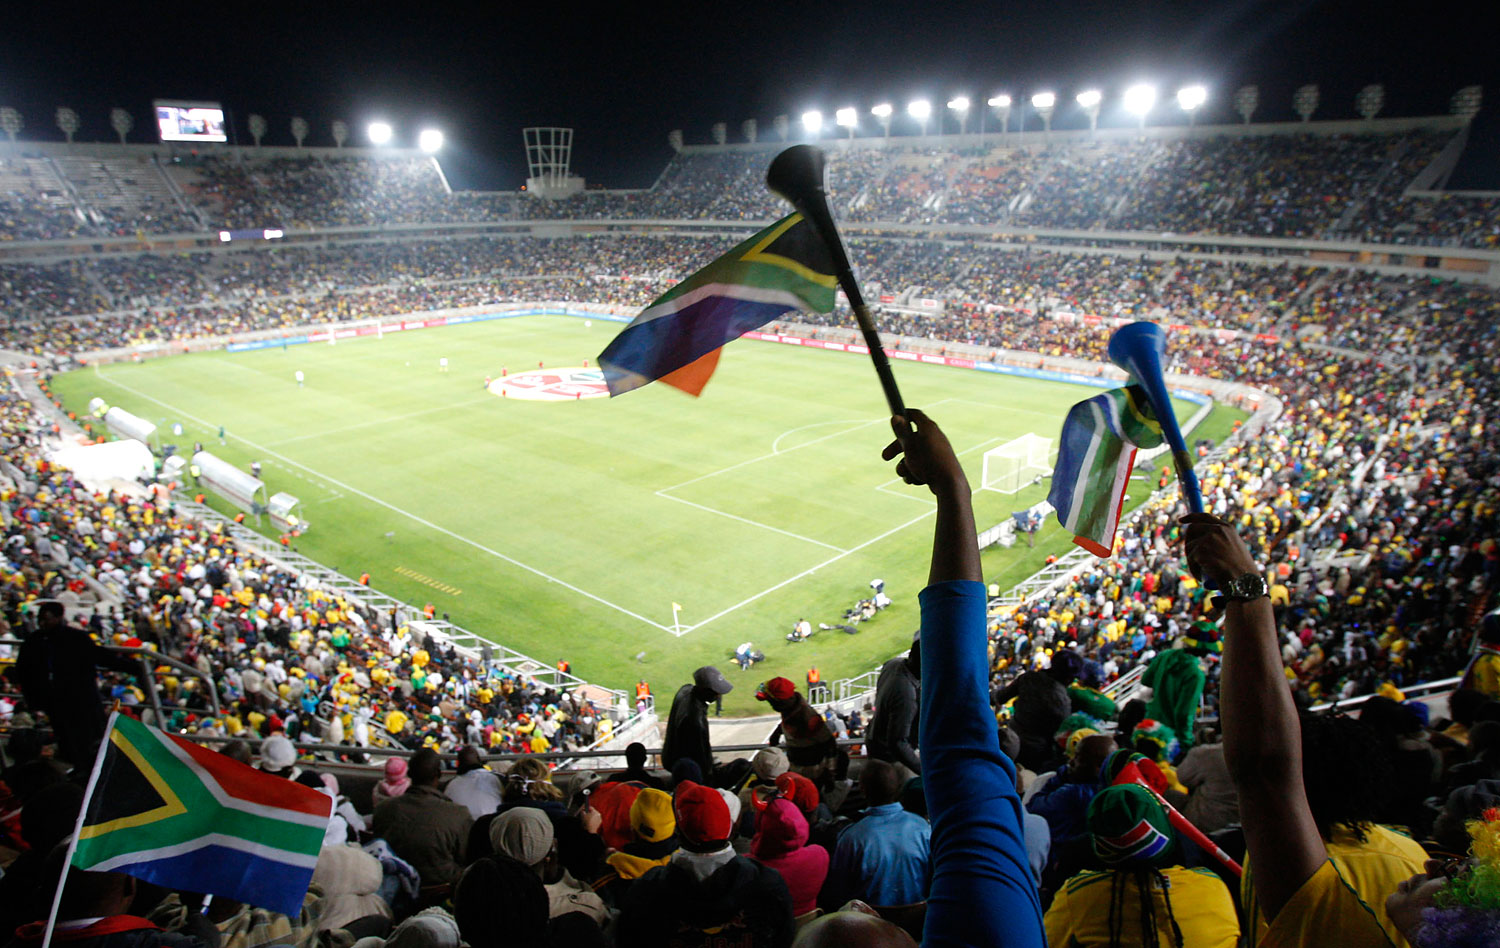 Spectators attend an exhibition soccer match between South Africa and Guatemala at the Peter Mokaba Stadium in Polokwane, South Africa, May 31, 2010. (AP)